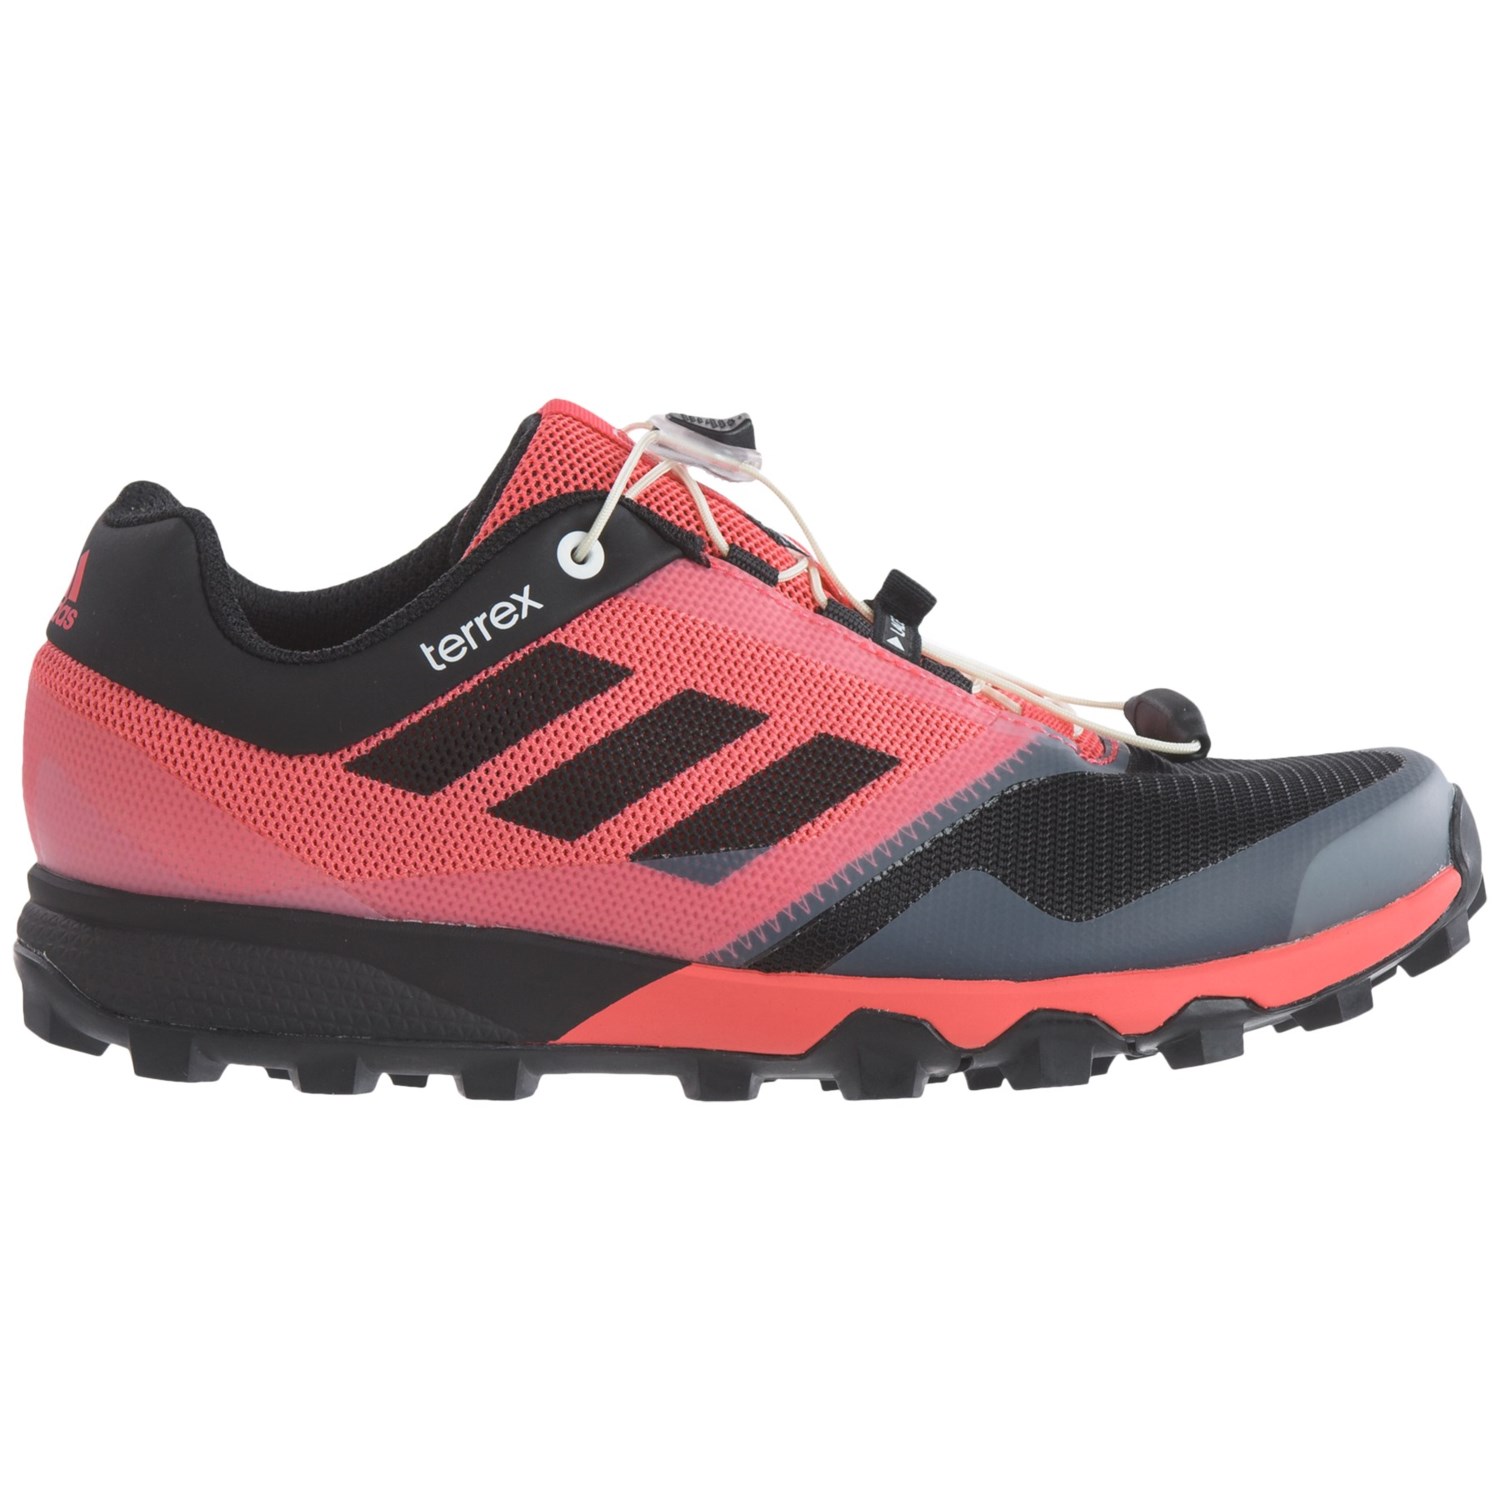 adidas outdoor Terrex Trailmaker Trail Running Shoes (For Women) - Save 39%